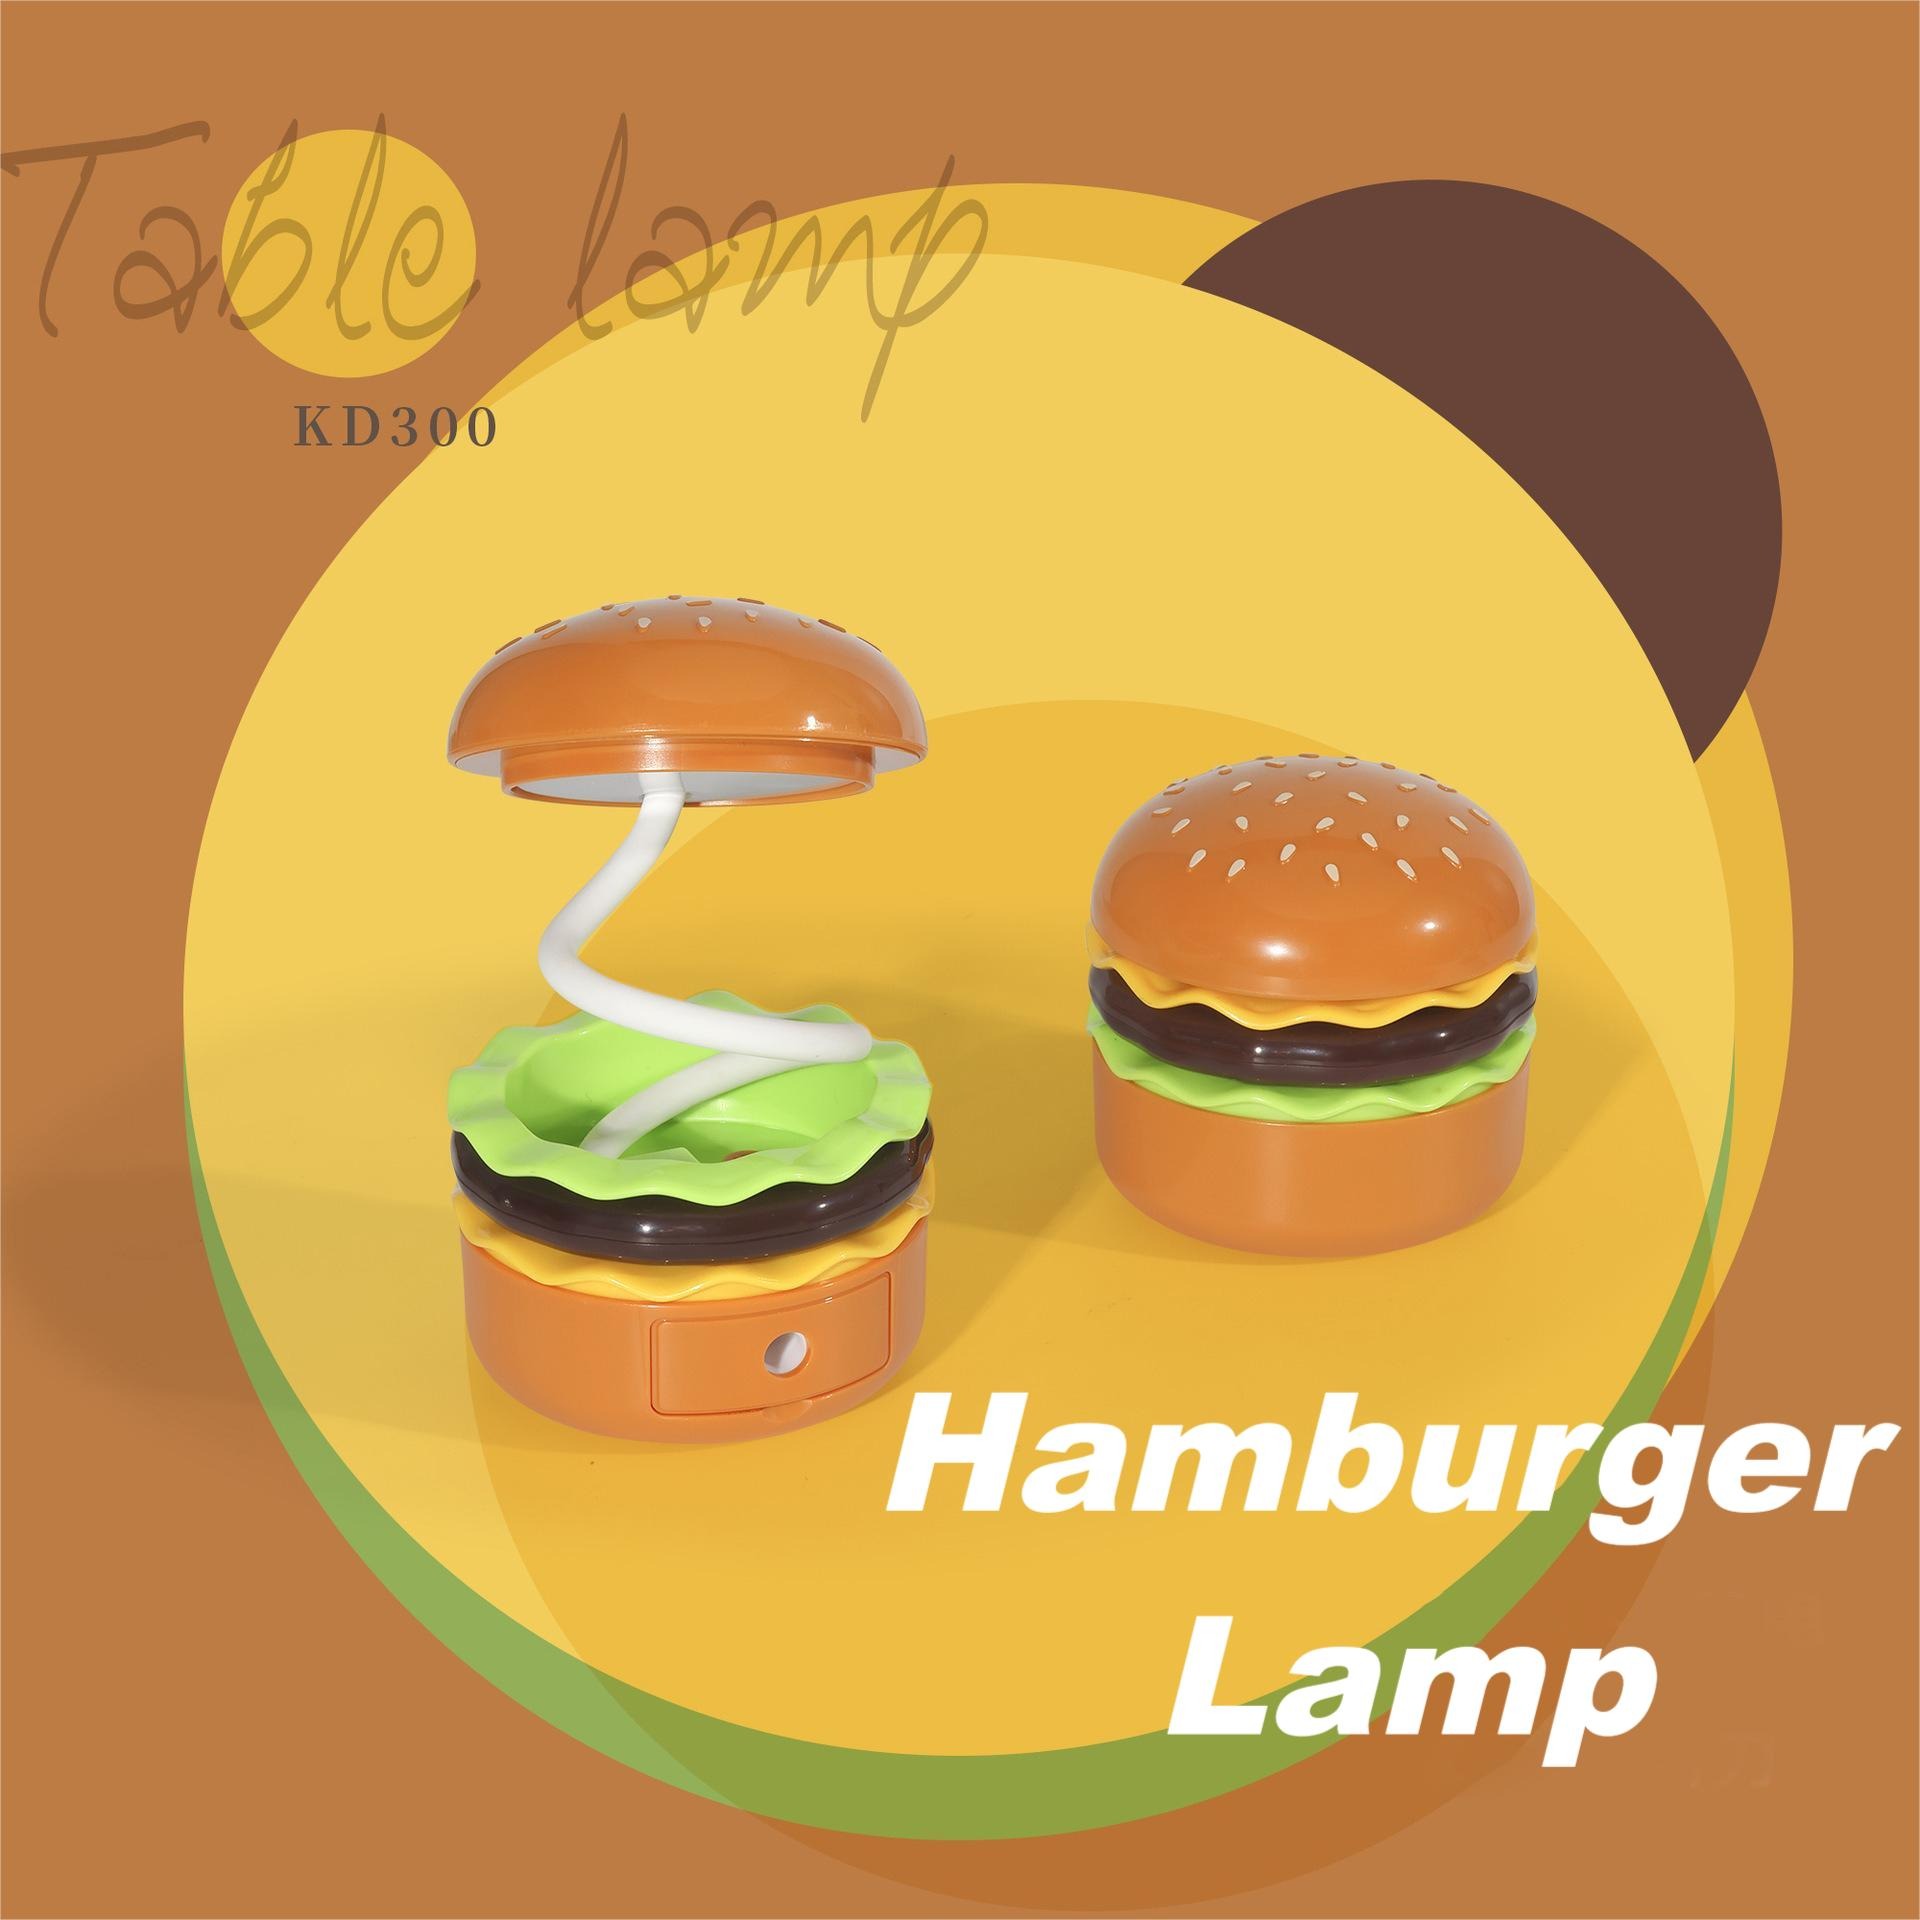 🍔Burger Expandable and Collapsible Fun Lamp